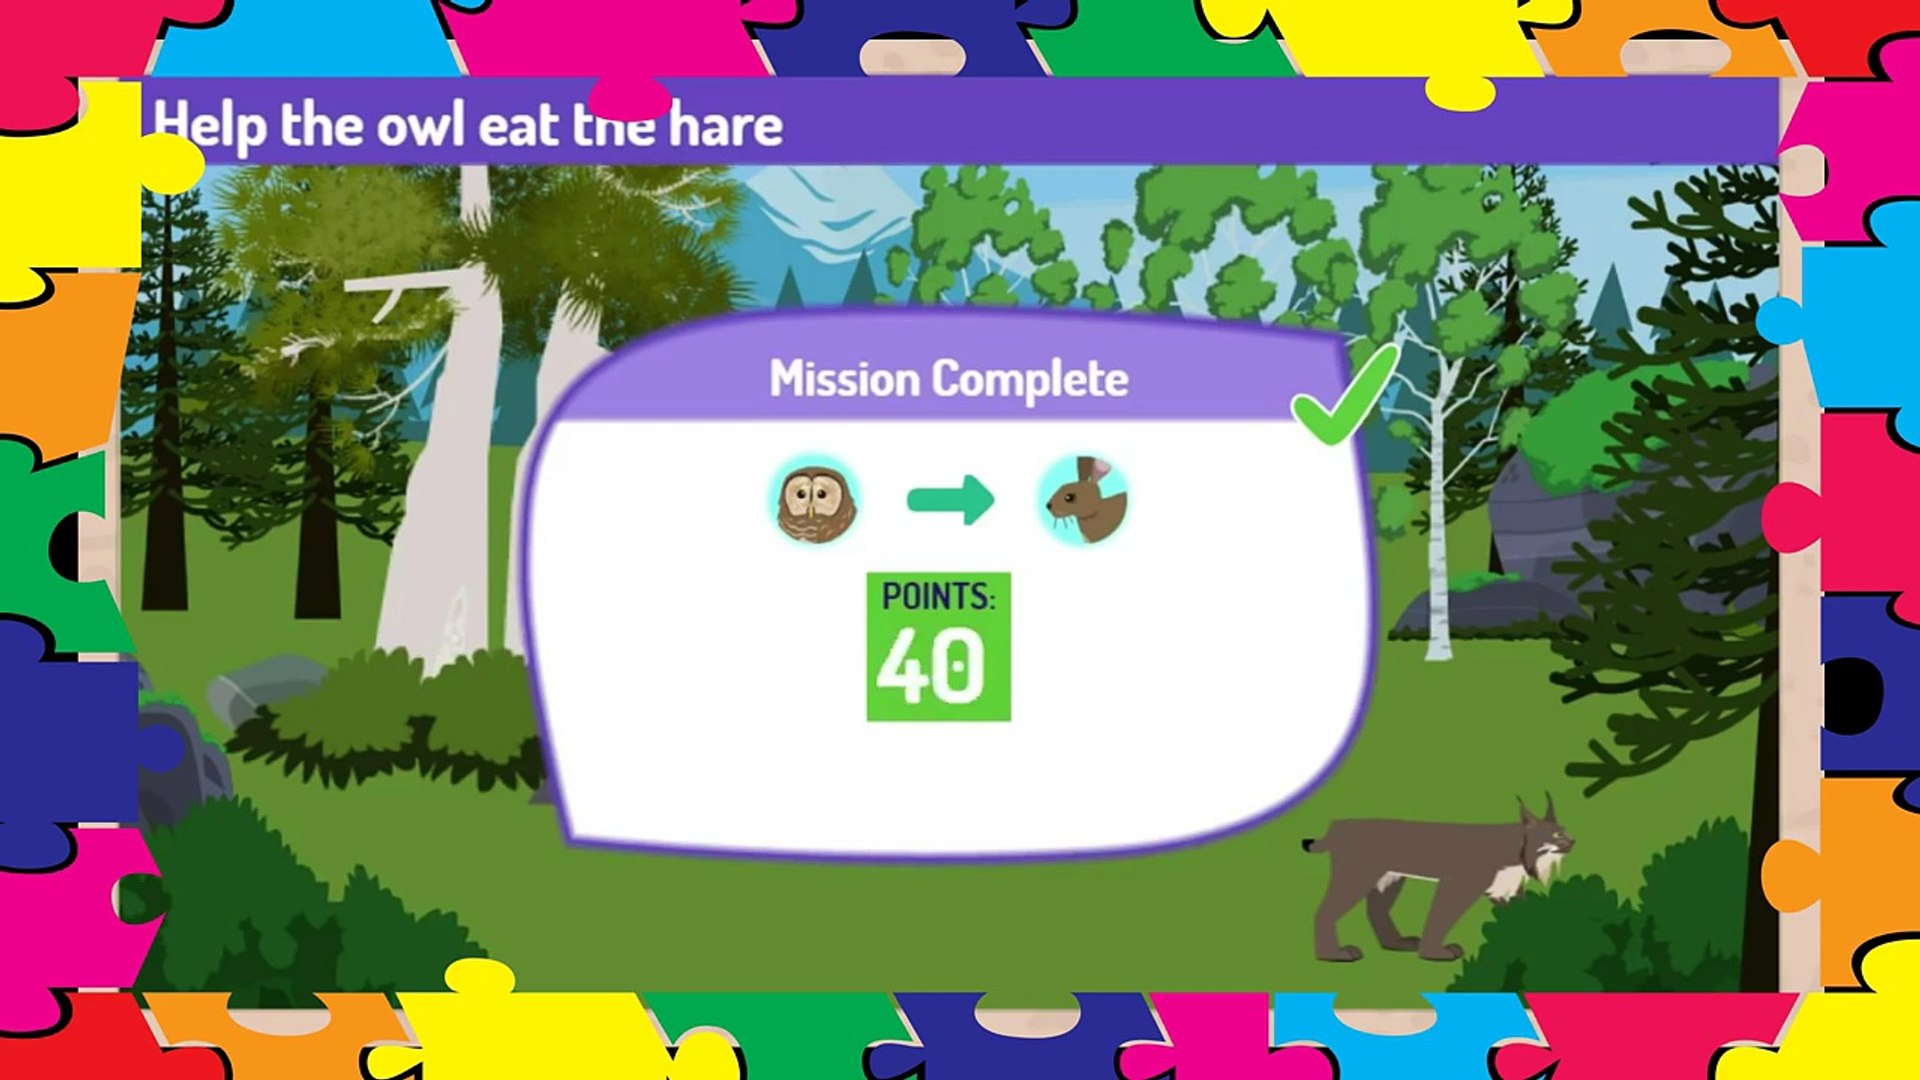 Food Chains and Food Webs. Education video game for kids